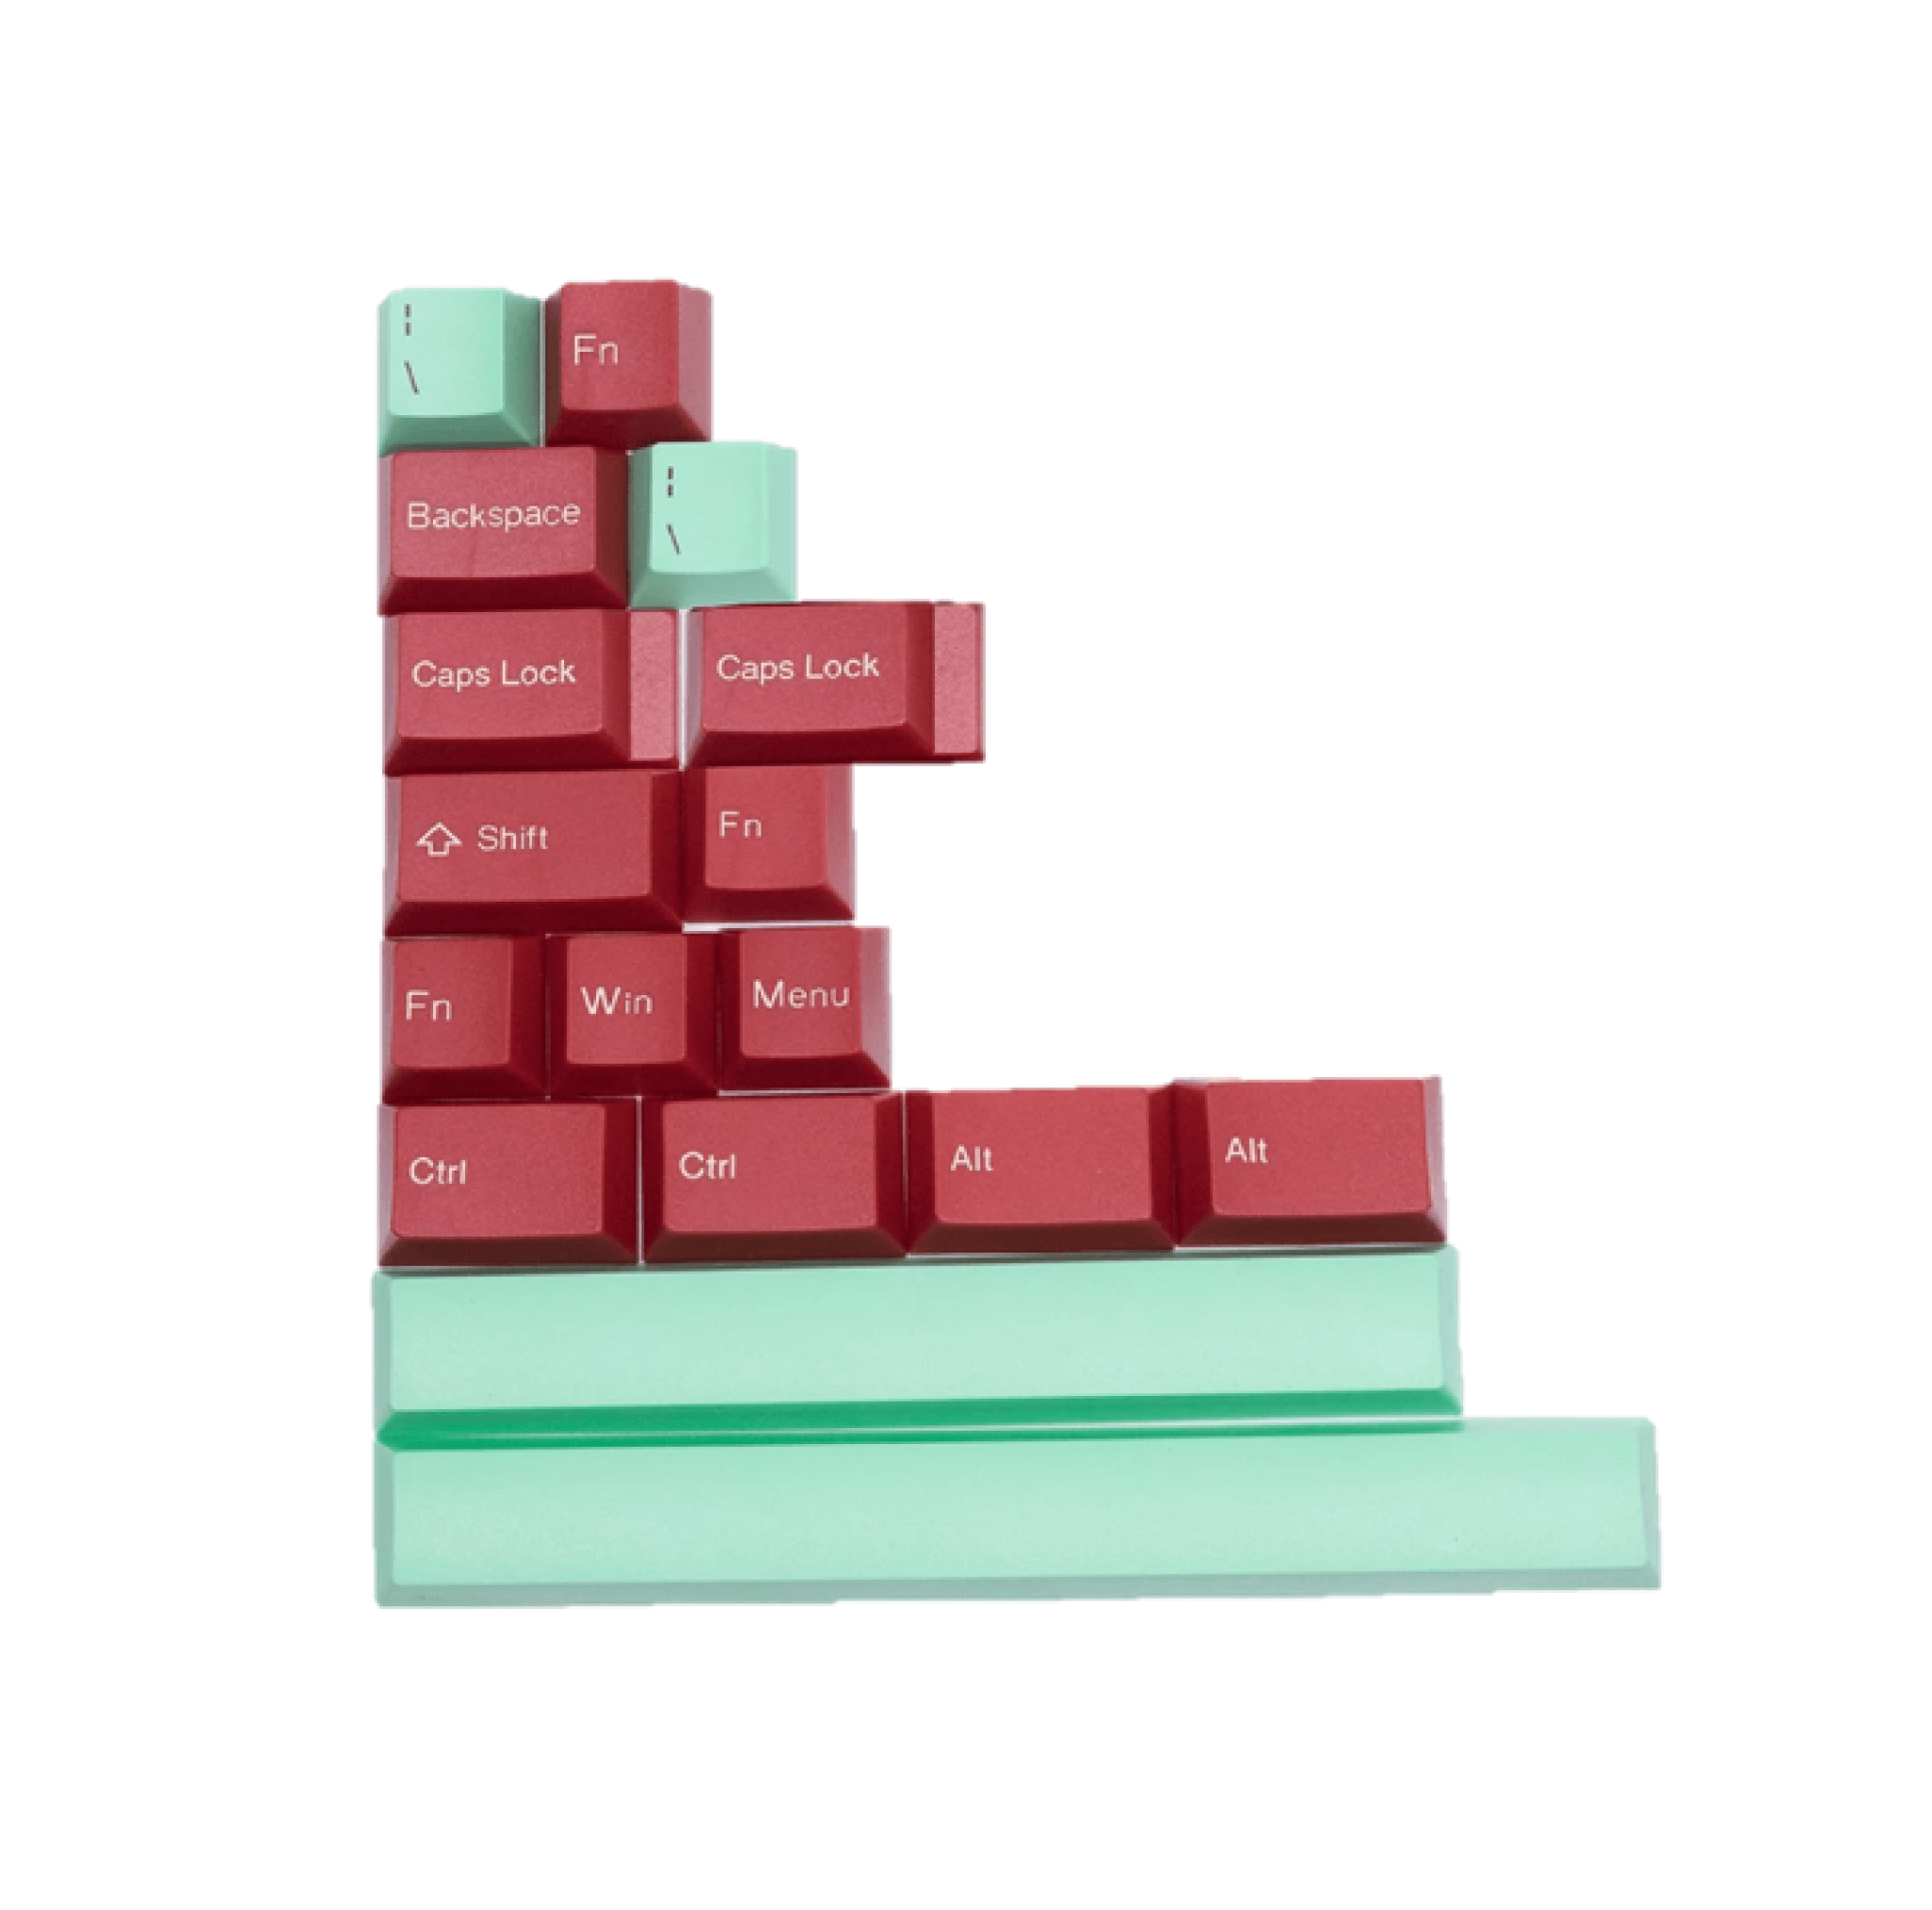 Tai-Hao Abs Keyset-Cubic 17 Add On - Mint/Red - Store 974 | ستور ٩٧٤